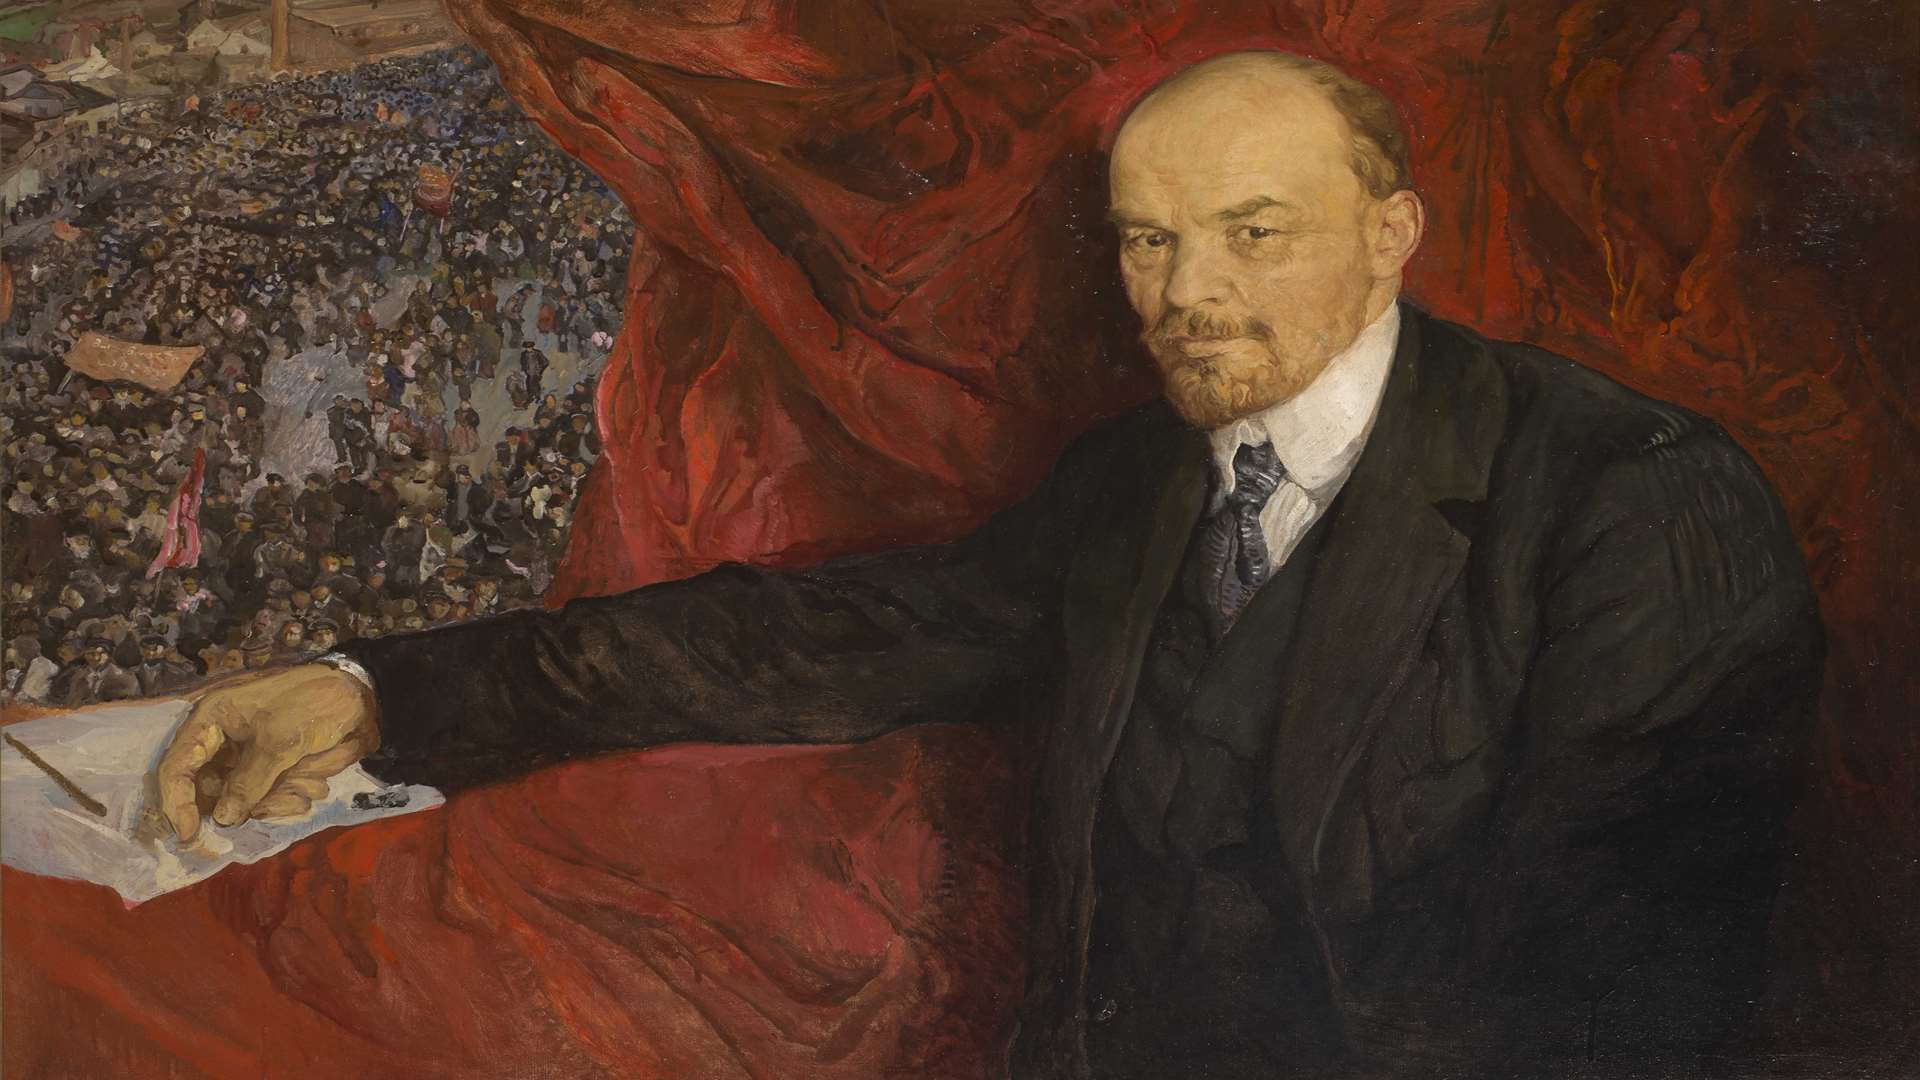 VI Lenin and Manifestation (1919) by Isaak Brodsky. Supplied by the State Historical Museum